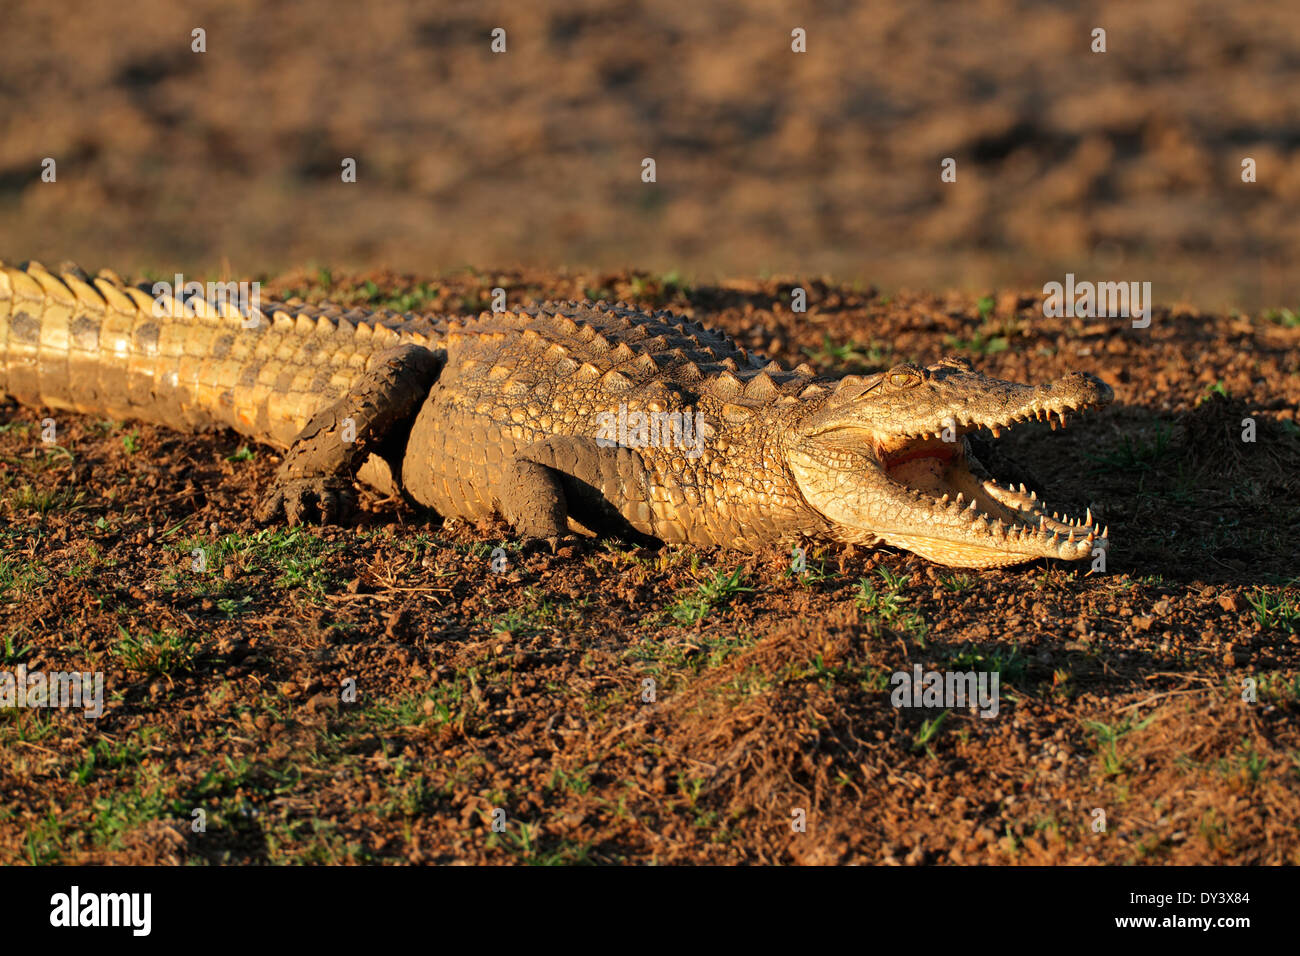 Nile crocodile (Crocodylus niloticus) resting on land with gaping jaws, South Africa Stock Photo